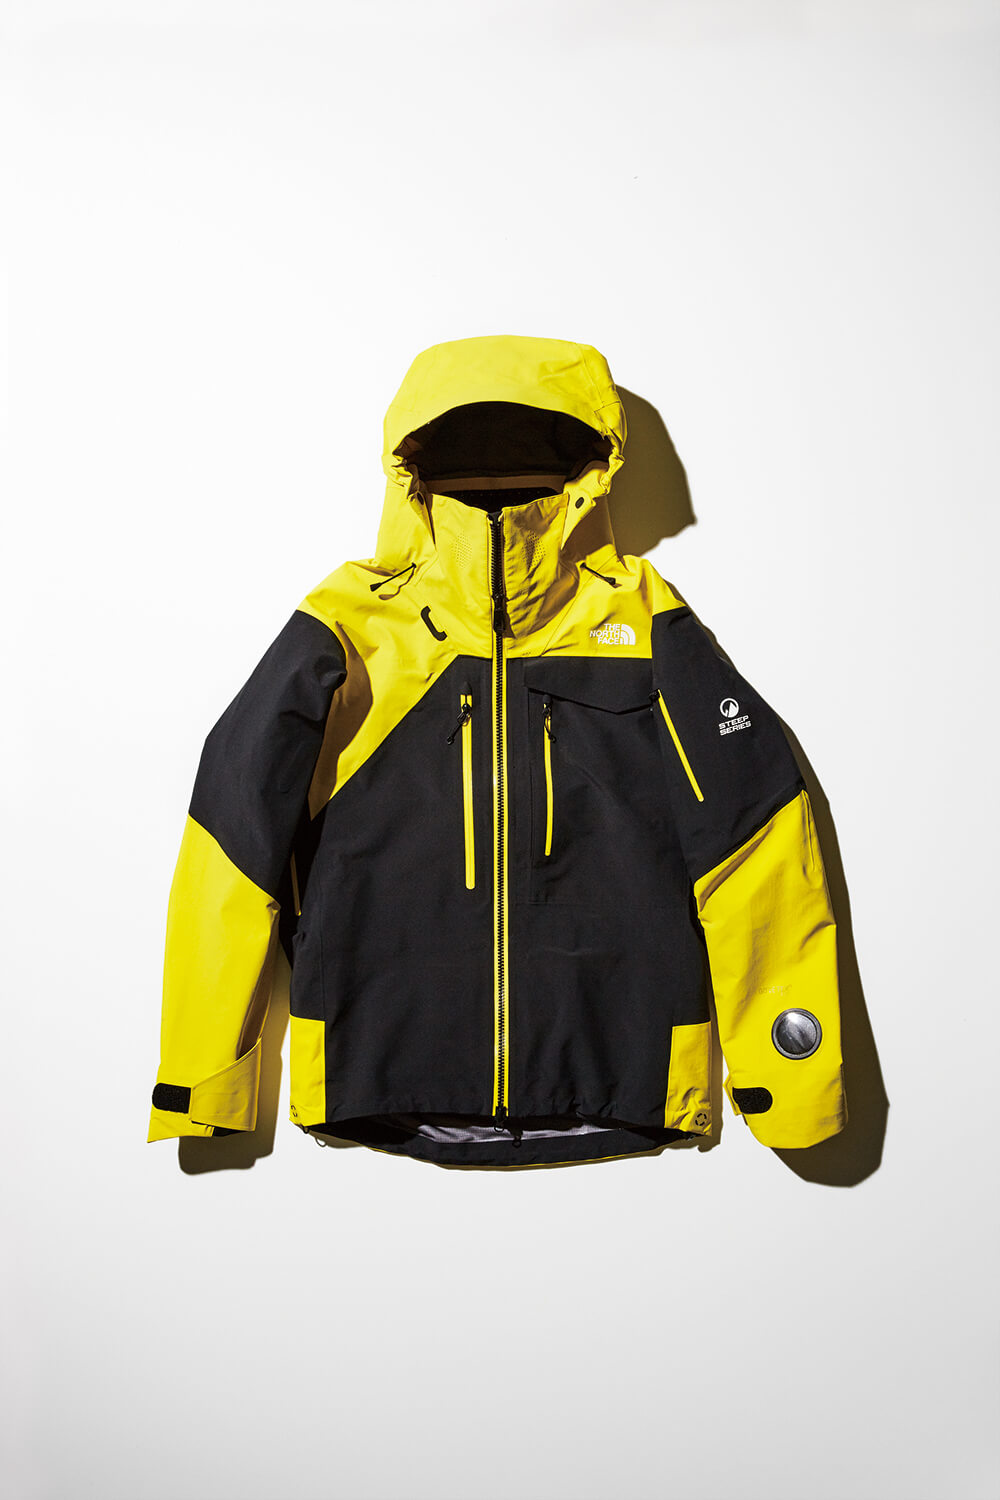 THE NORTH FACE WINTER GEAR CATALOG 2018-2019 | THE NORTH FACE 